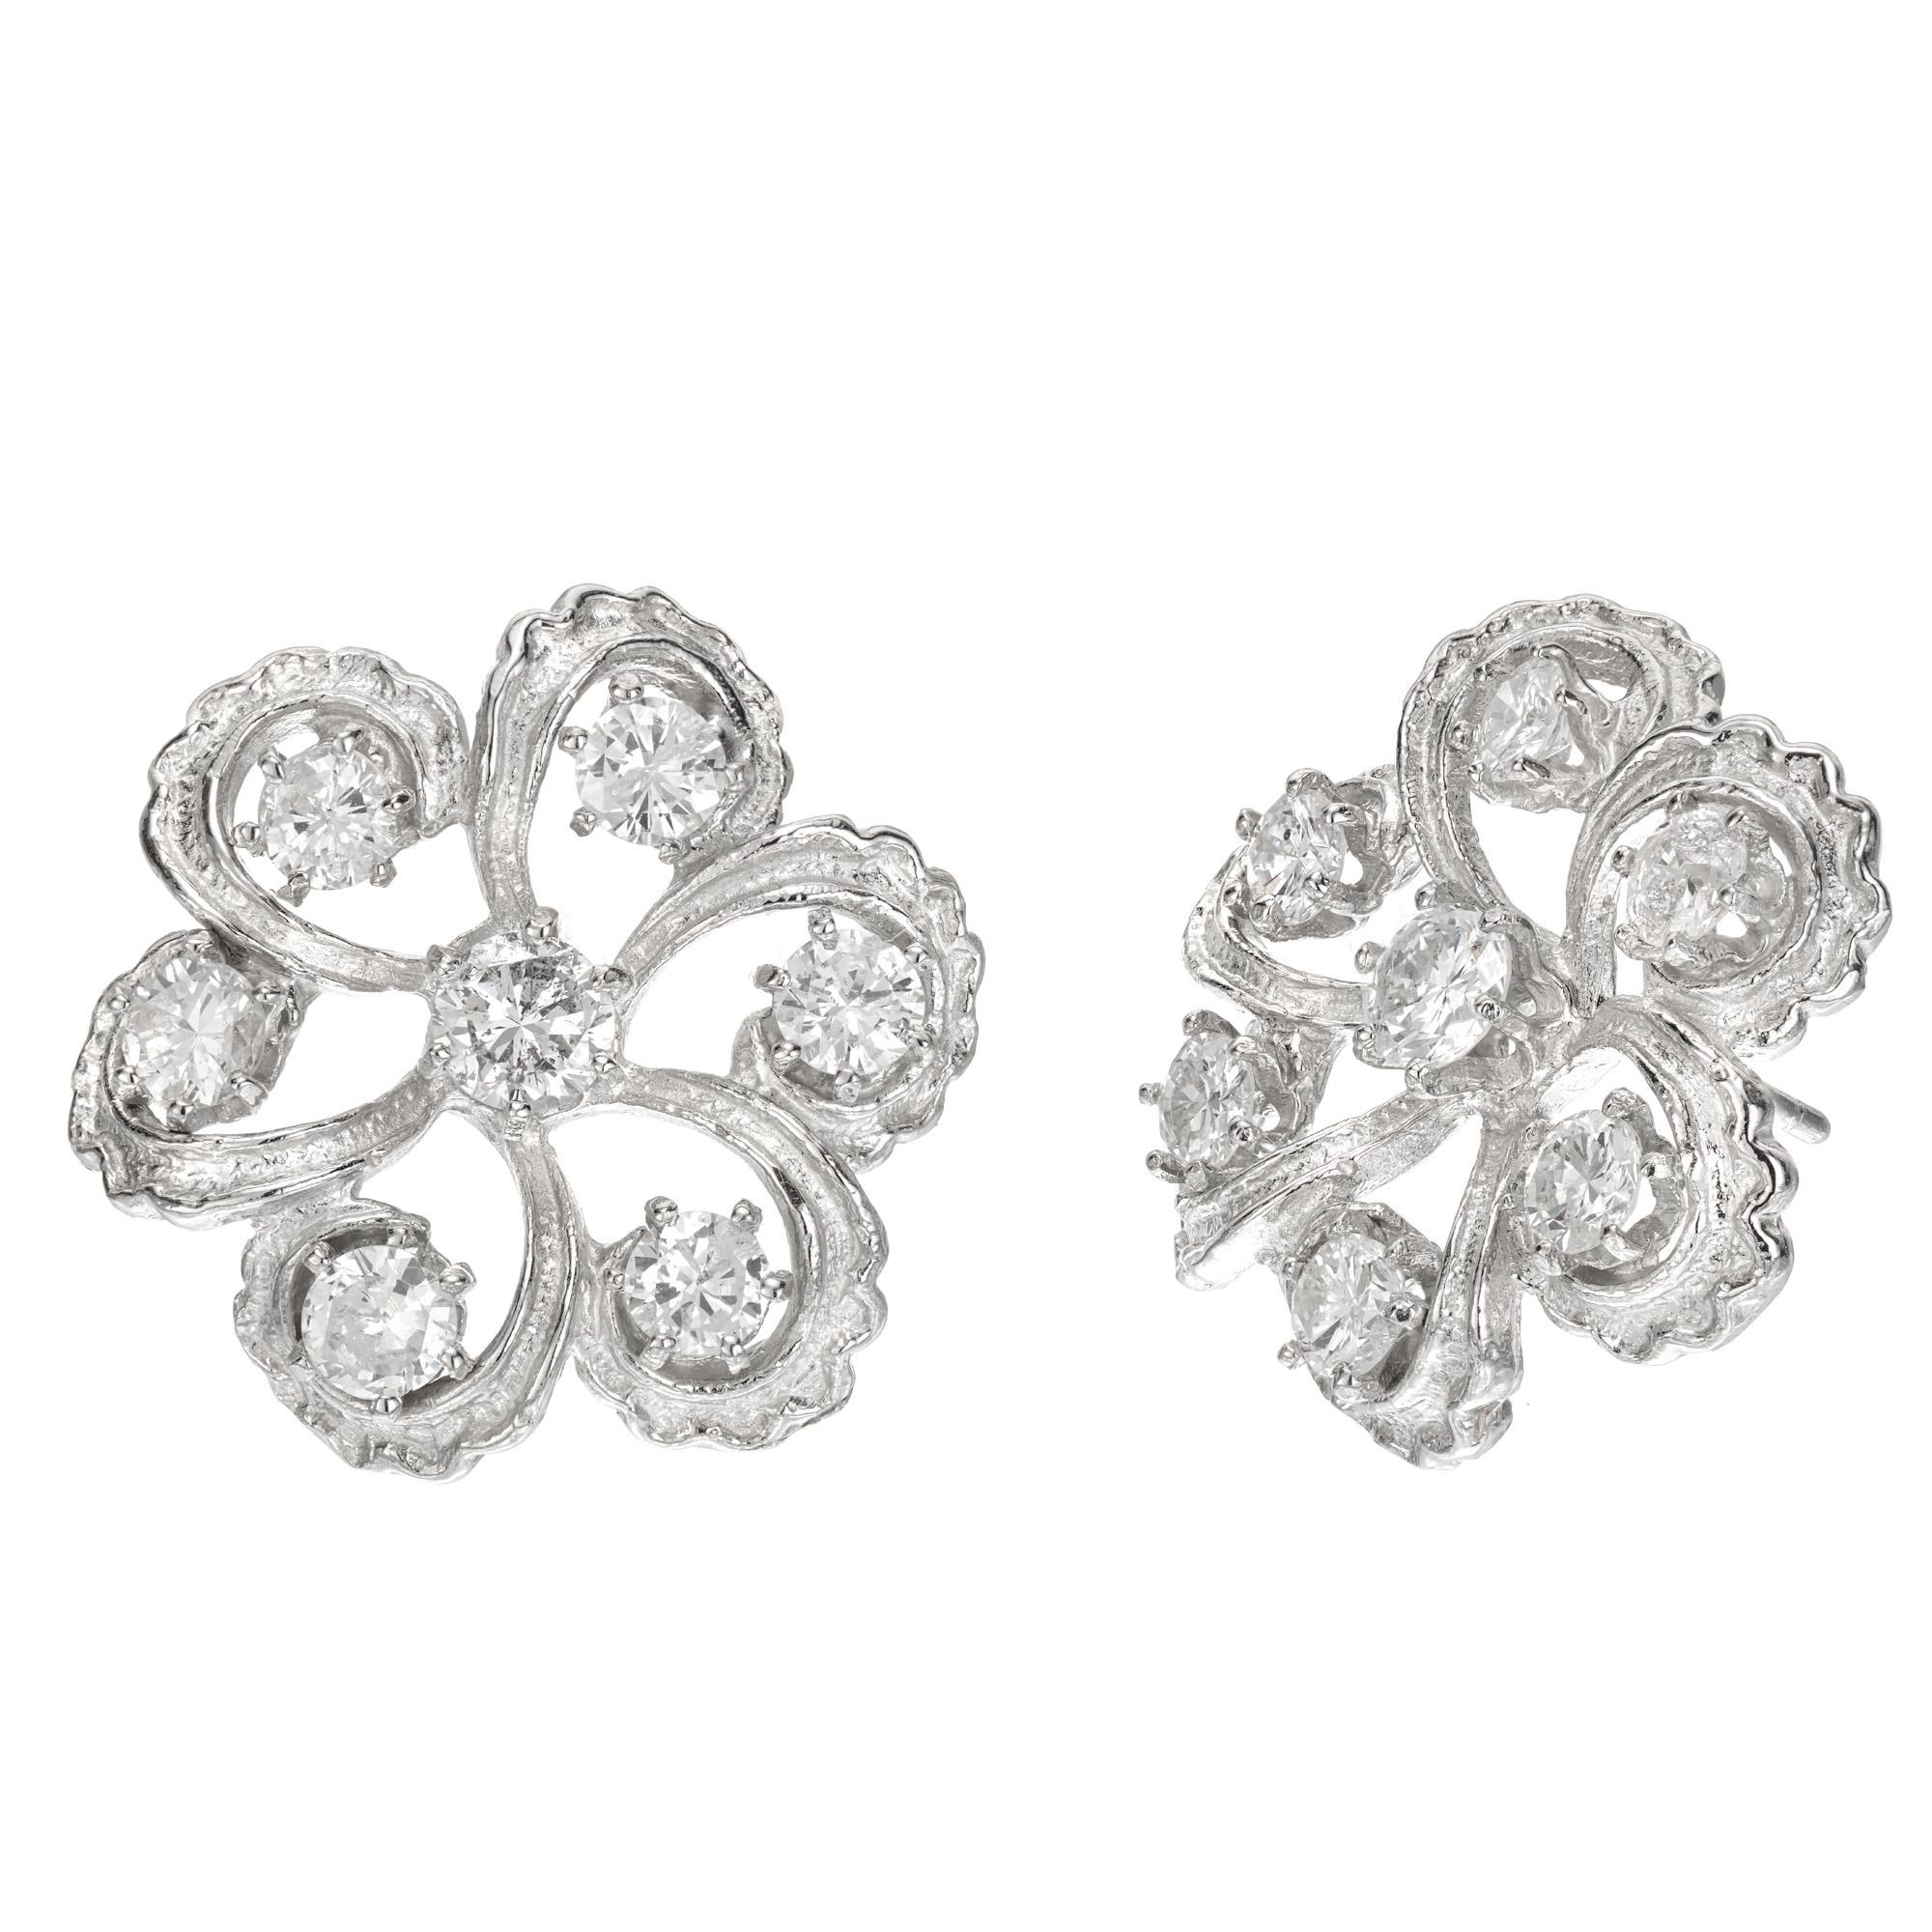 Circa 1930 to 1940 circular swirl diamond earrings. 14 transitional round cut diamonds set in textured and hand detailed platinum settings. Large sized platinum safety backs.

12 transitional cut round diamonds, G SI -I approx. 1.80cts
2